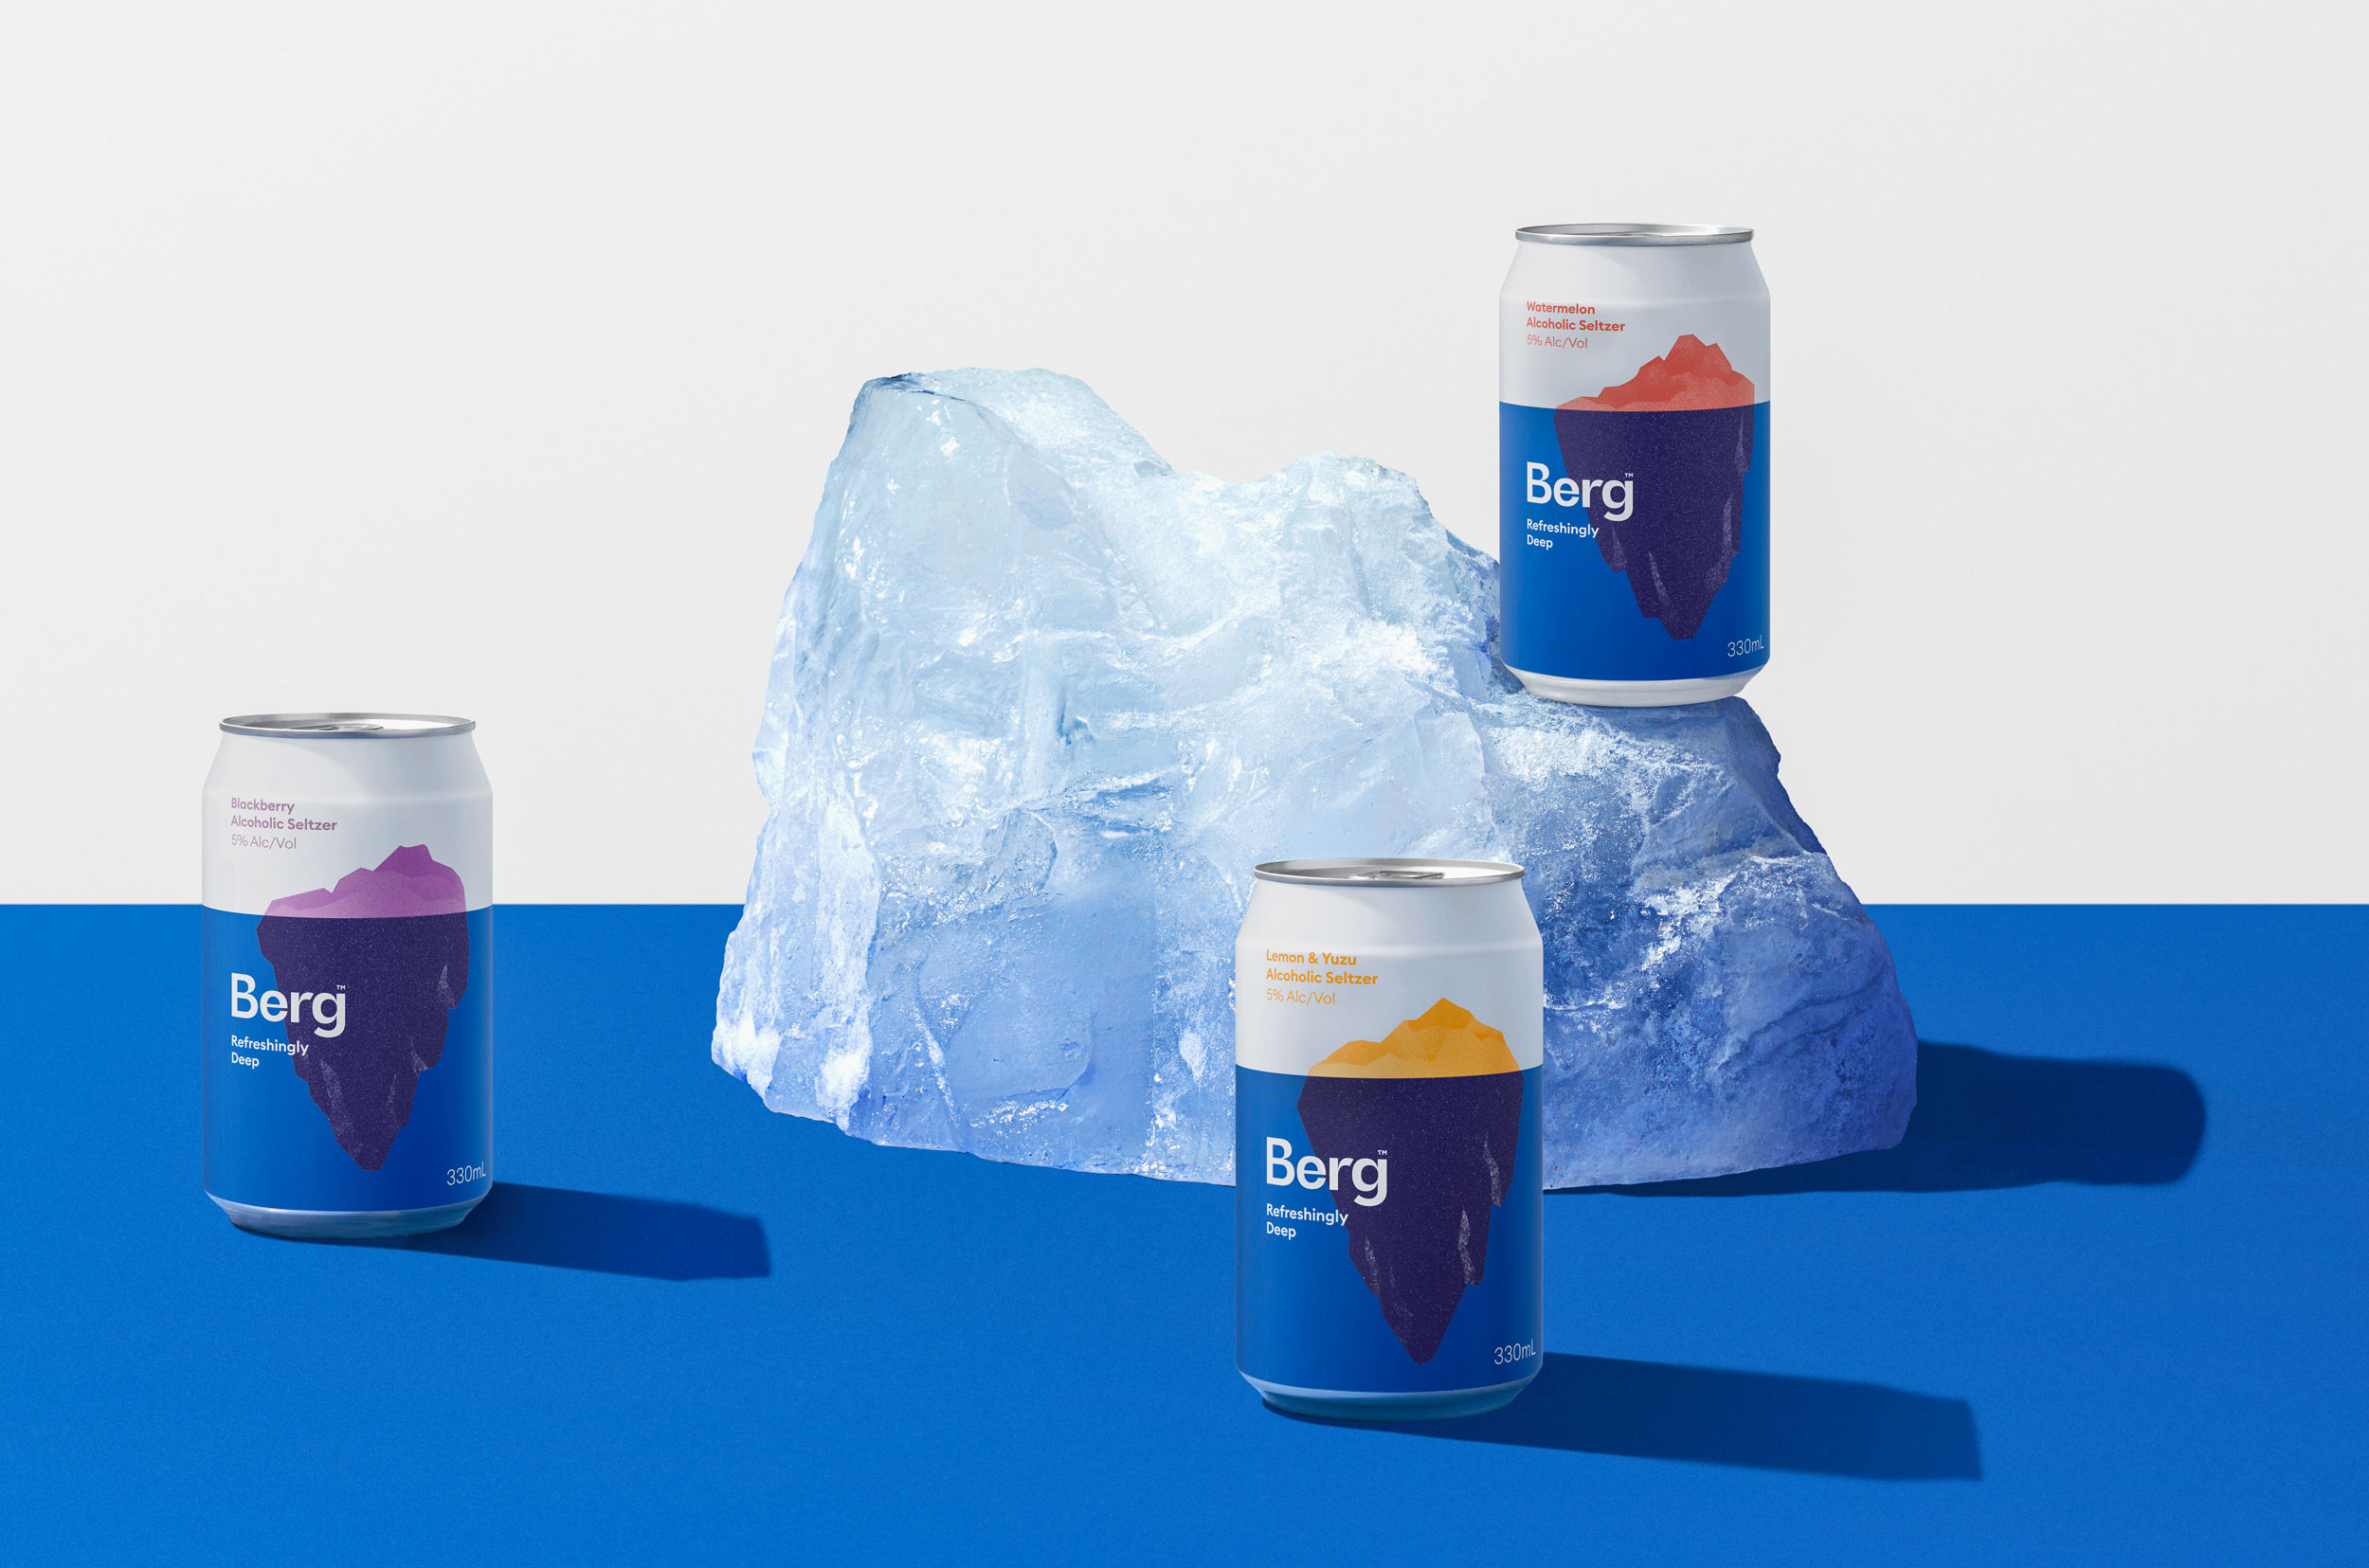 Brand identity, packaging design and art direction by Marx Design for New Zealand and Australian hard seltzer brand Berg